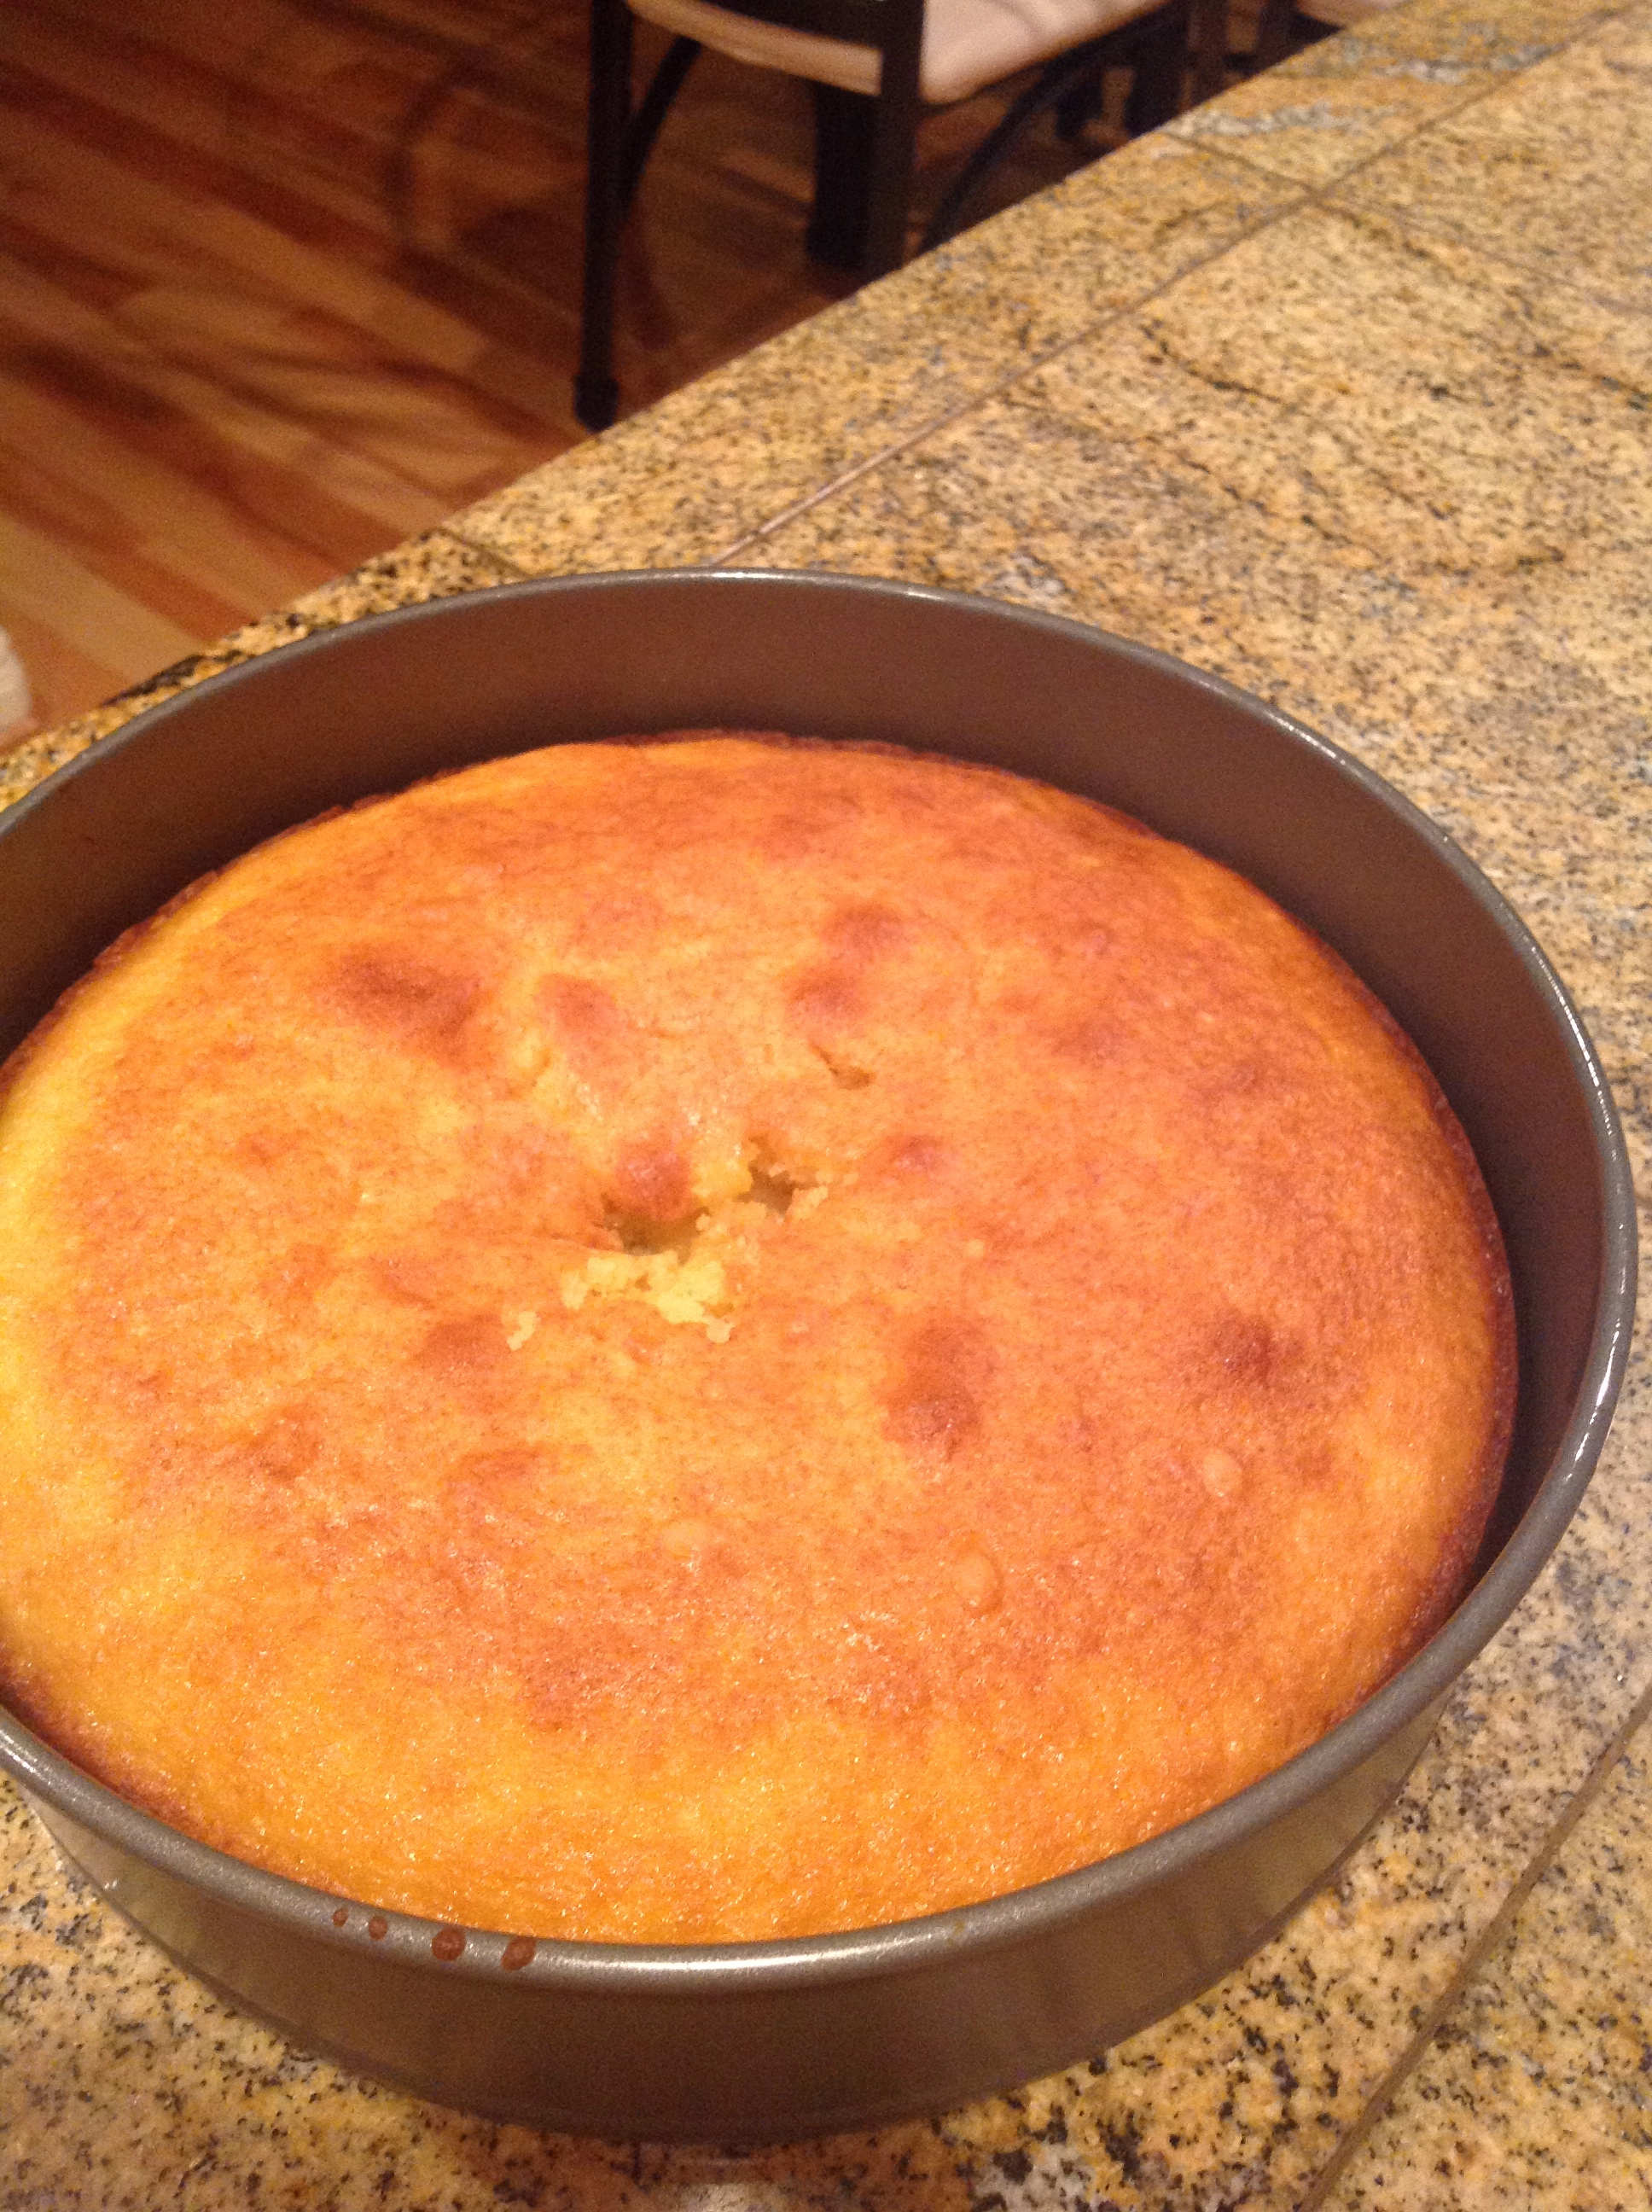 I baked pineapple cake this evening! don't be too impressed this is just from a cake mix!